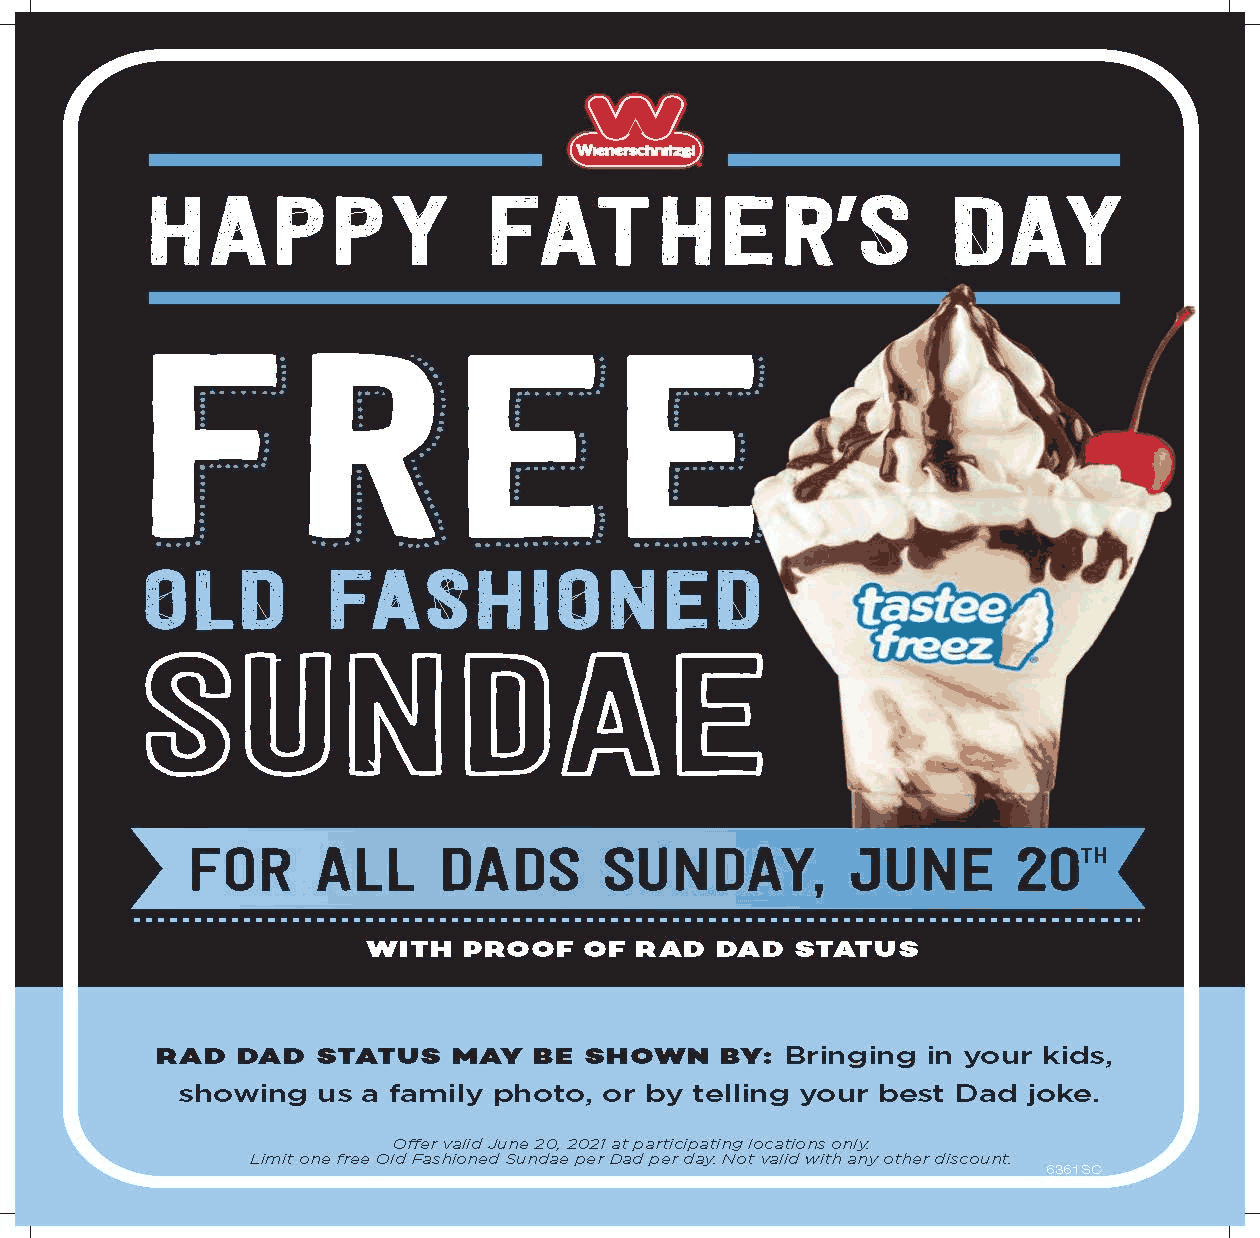 Wienerschnitzel restaurants Coupon  Free old fashioned ice cream sundae for all Dads Sunday at Wienerschnitzel restaurants #wienerschnitzel 